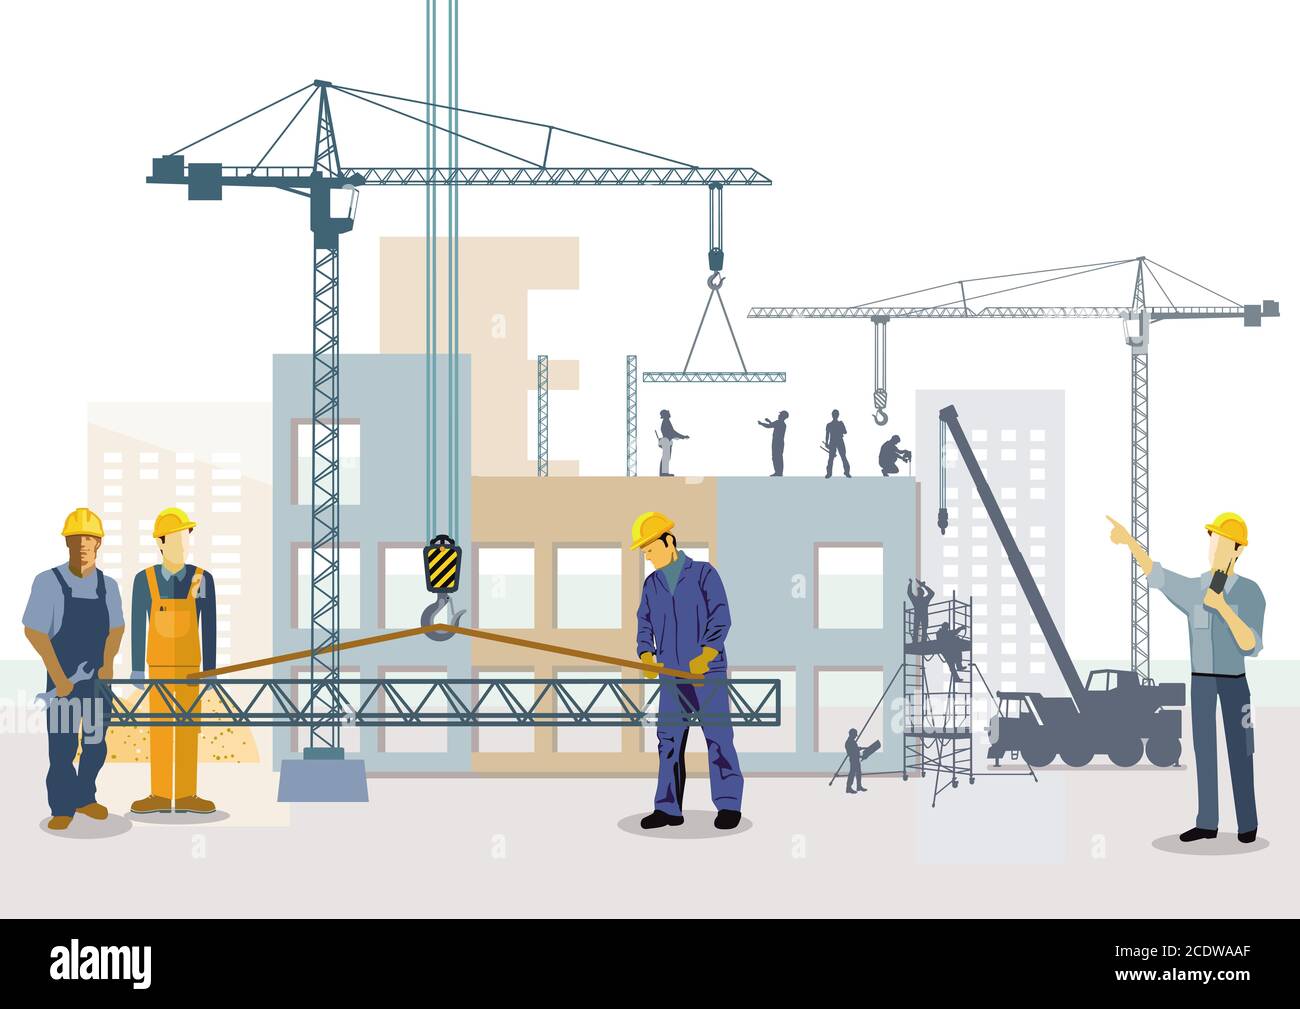 Building house. Work process of buildings construction Stock Photo